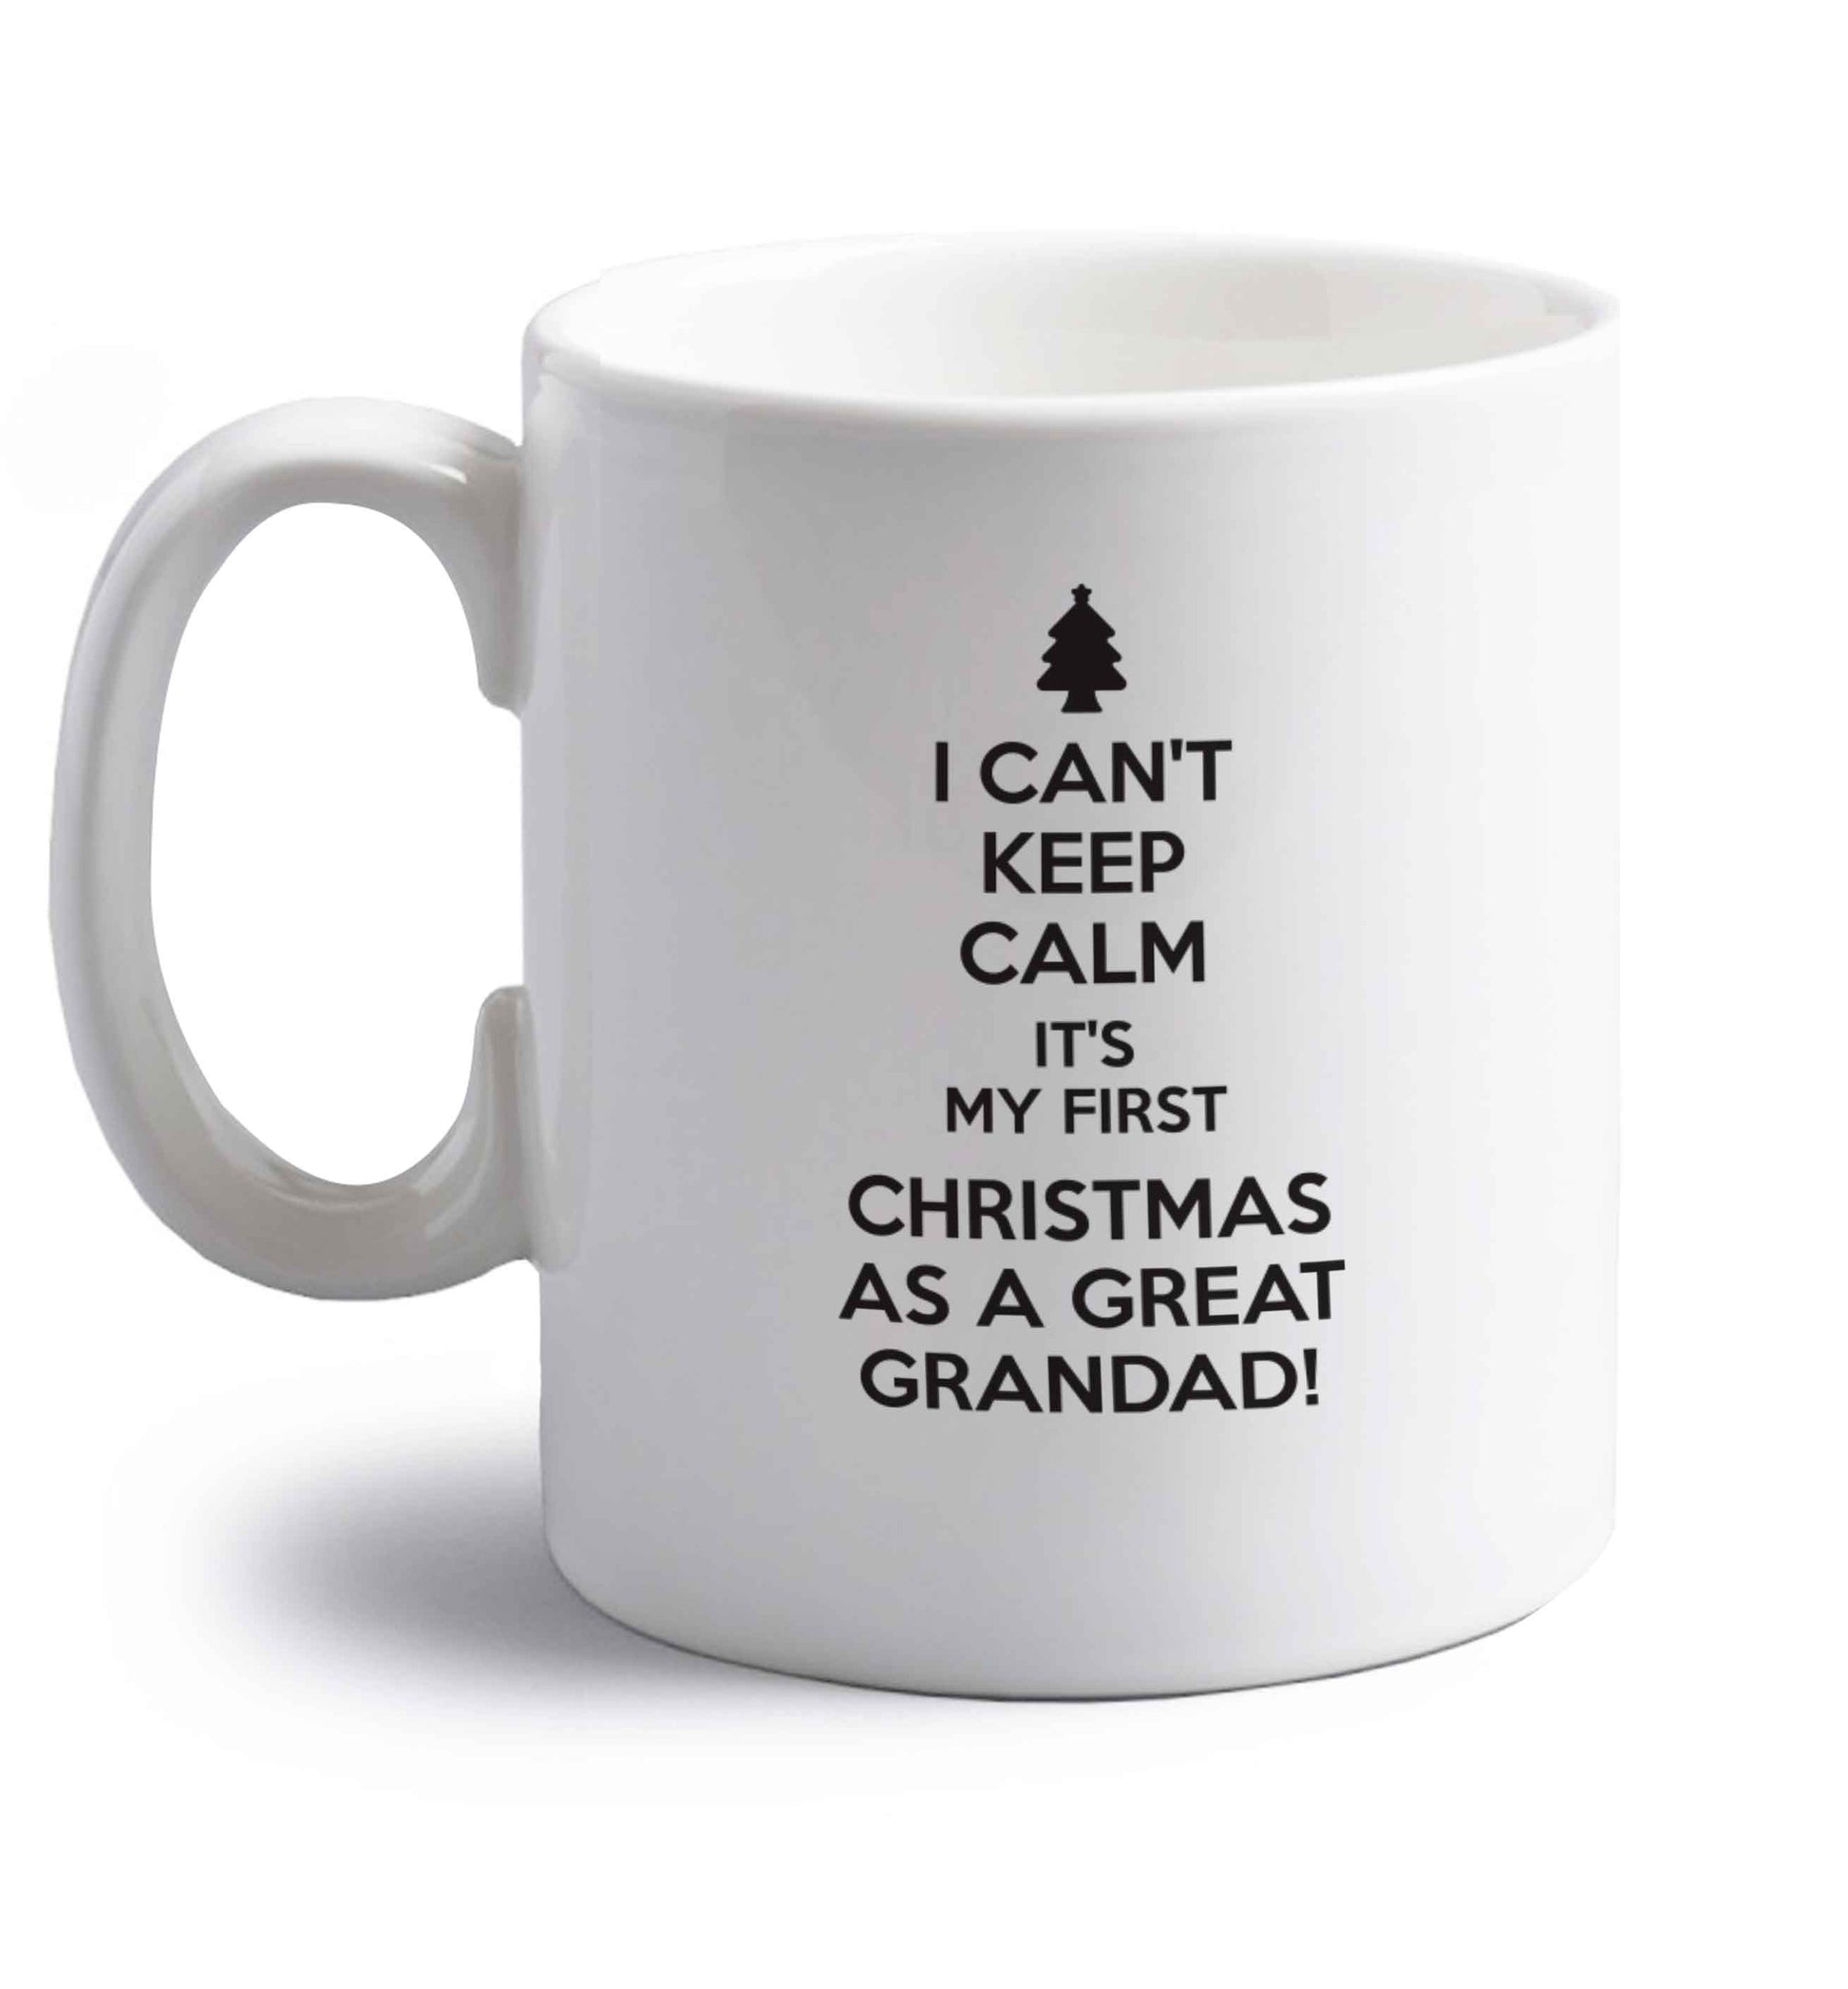 I can't keep calm it's my first Christmas as a great grandad! right handed white ceramic mug 